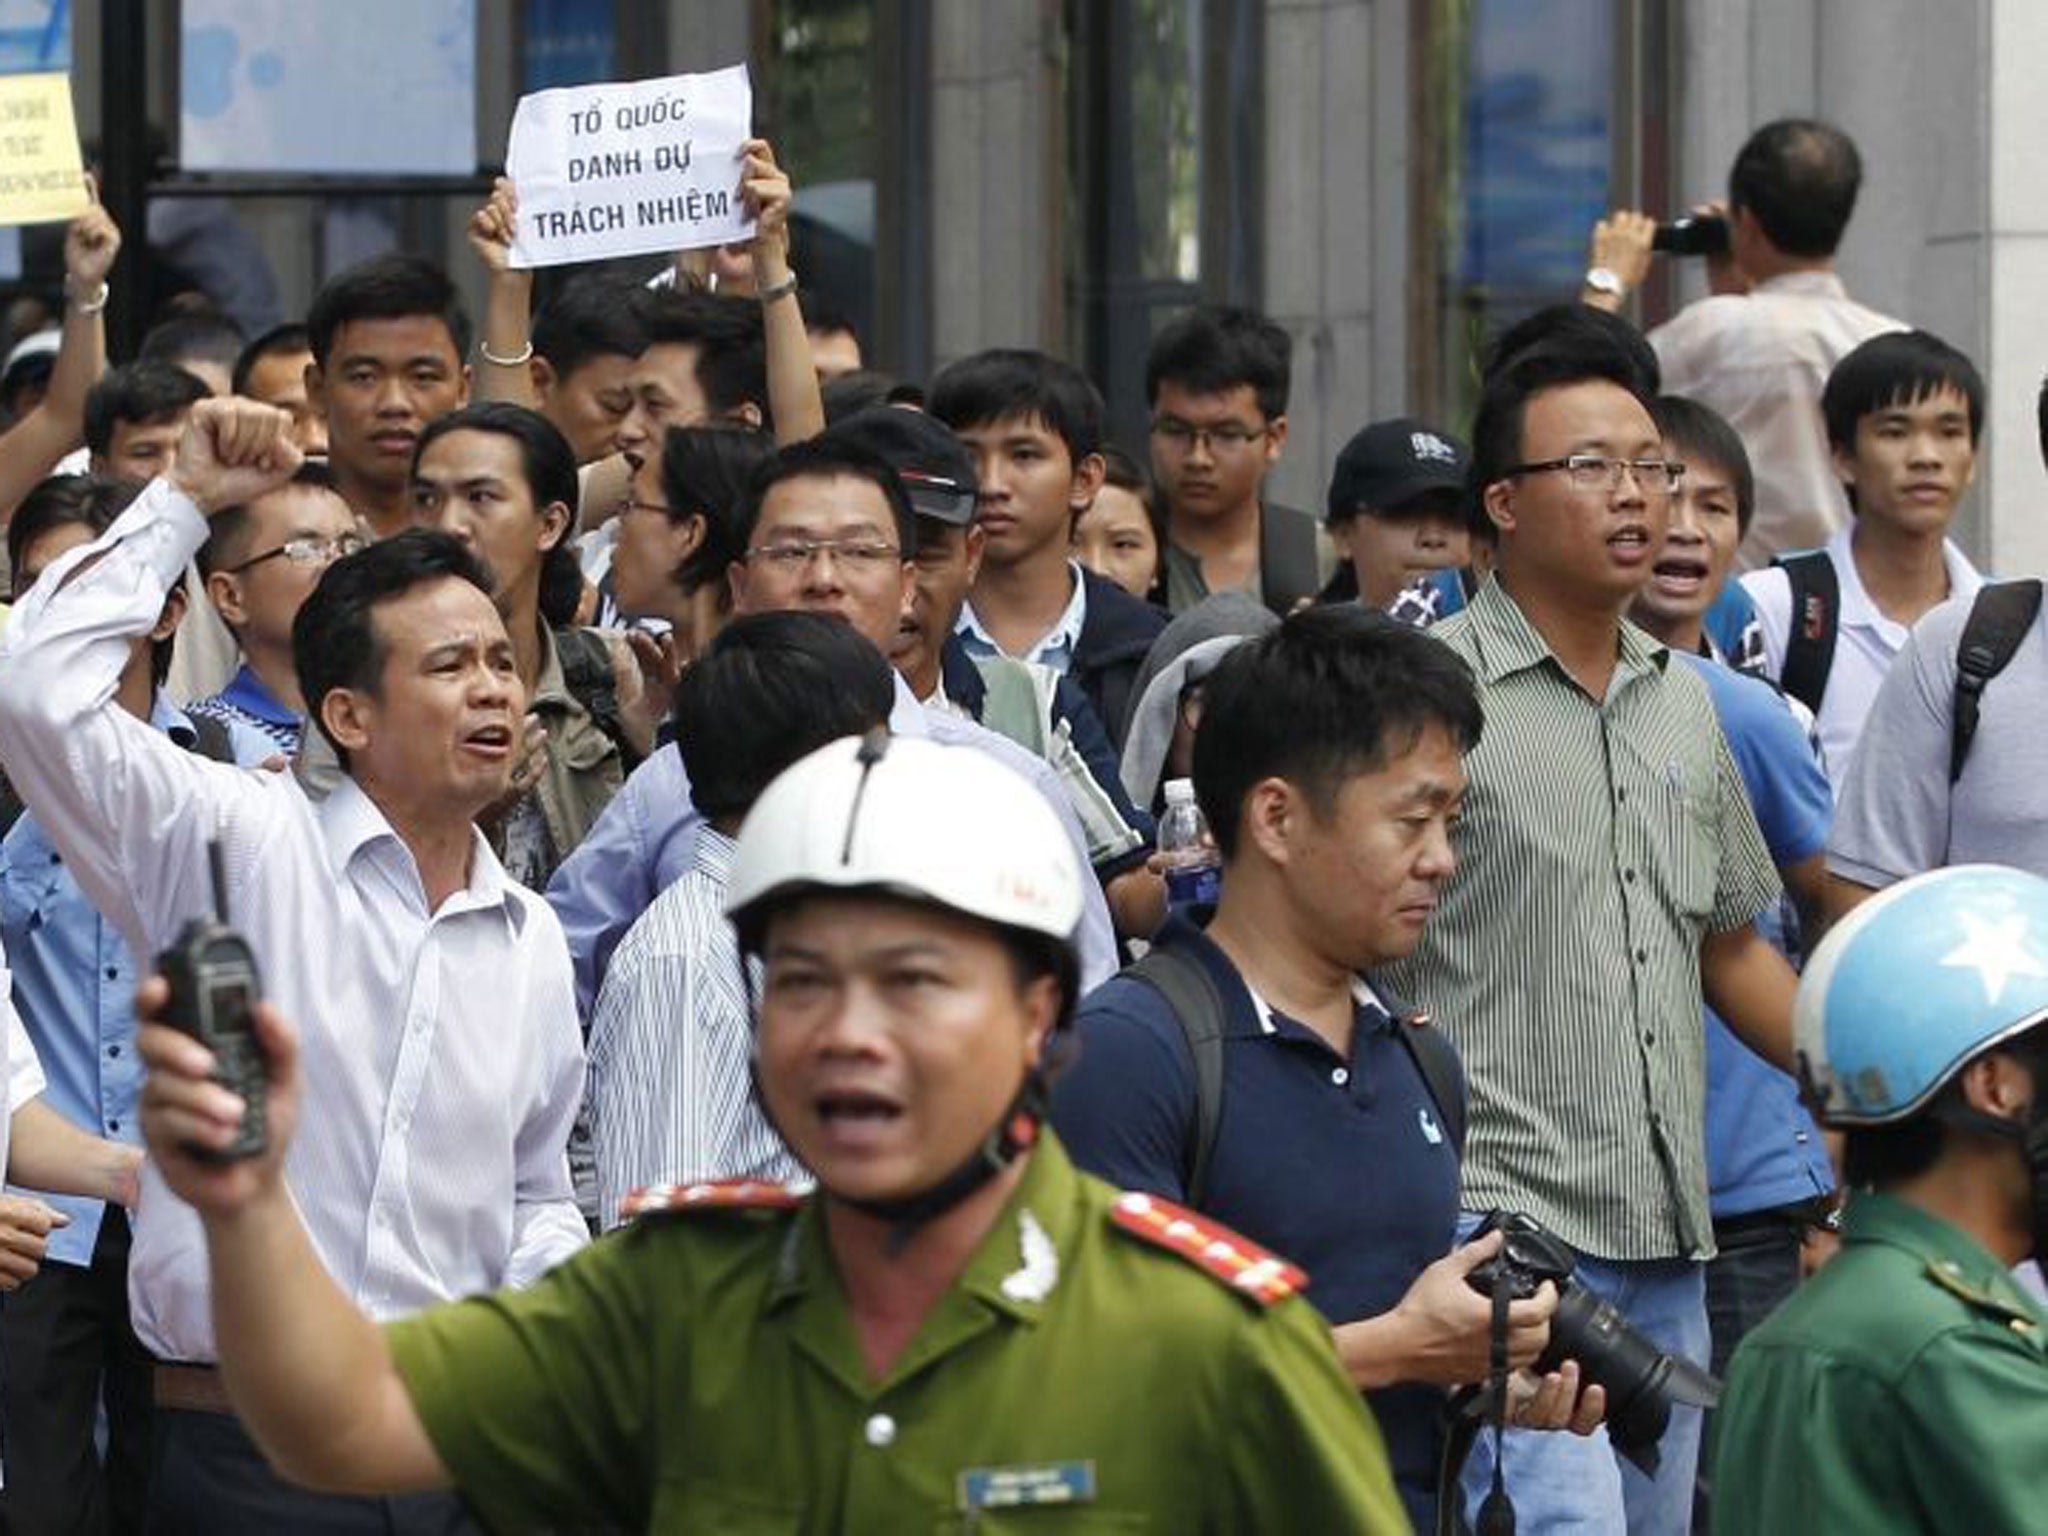 Protesters chant anti-China slogans as they march during an anti-China protest in Vietnam's southern Ho Chi Minh city on 18 May, 2014